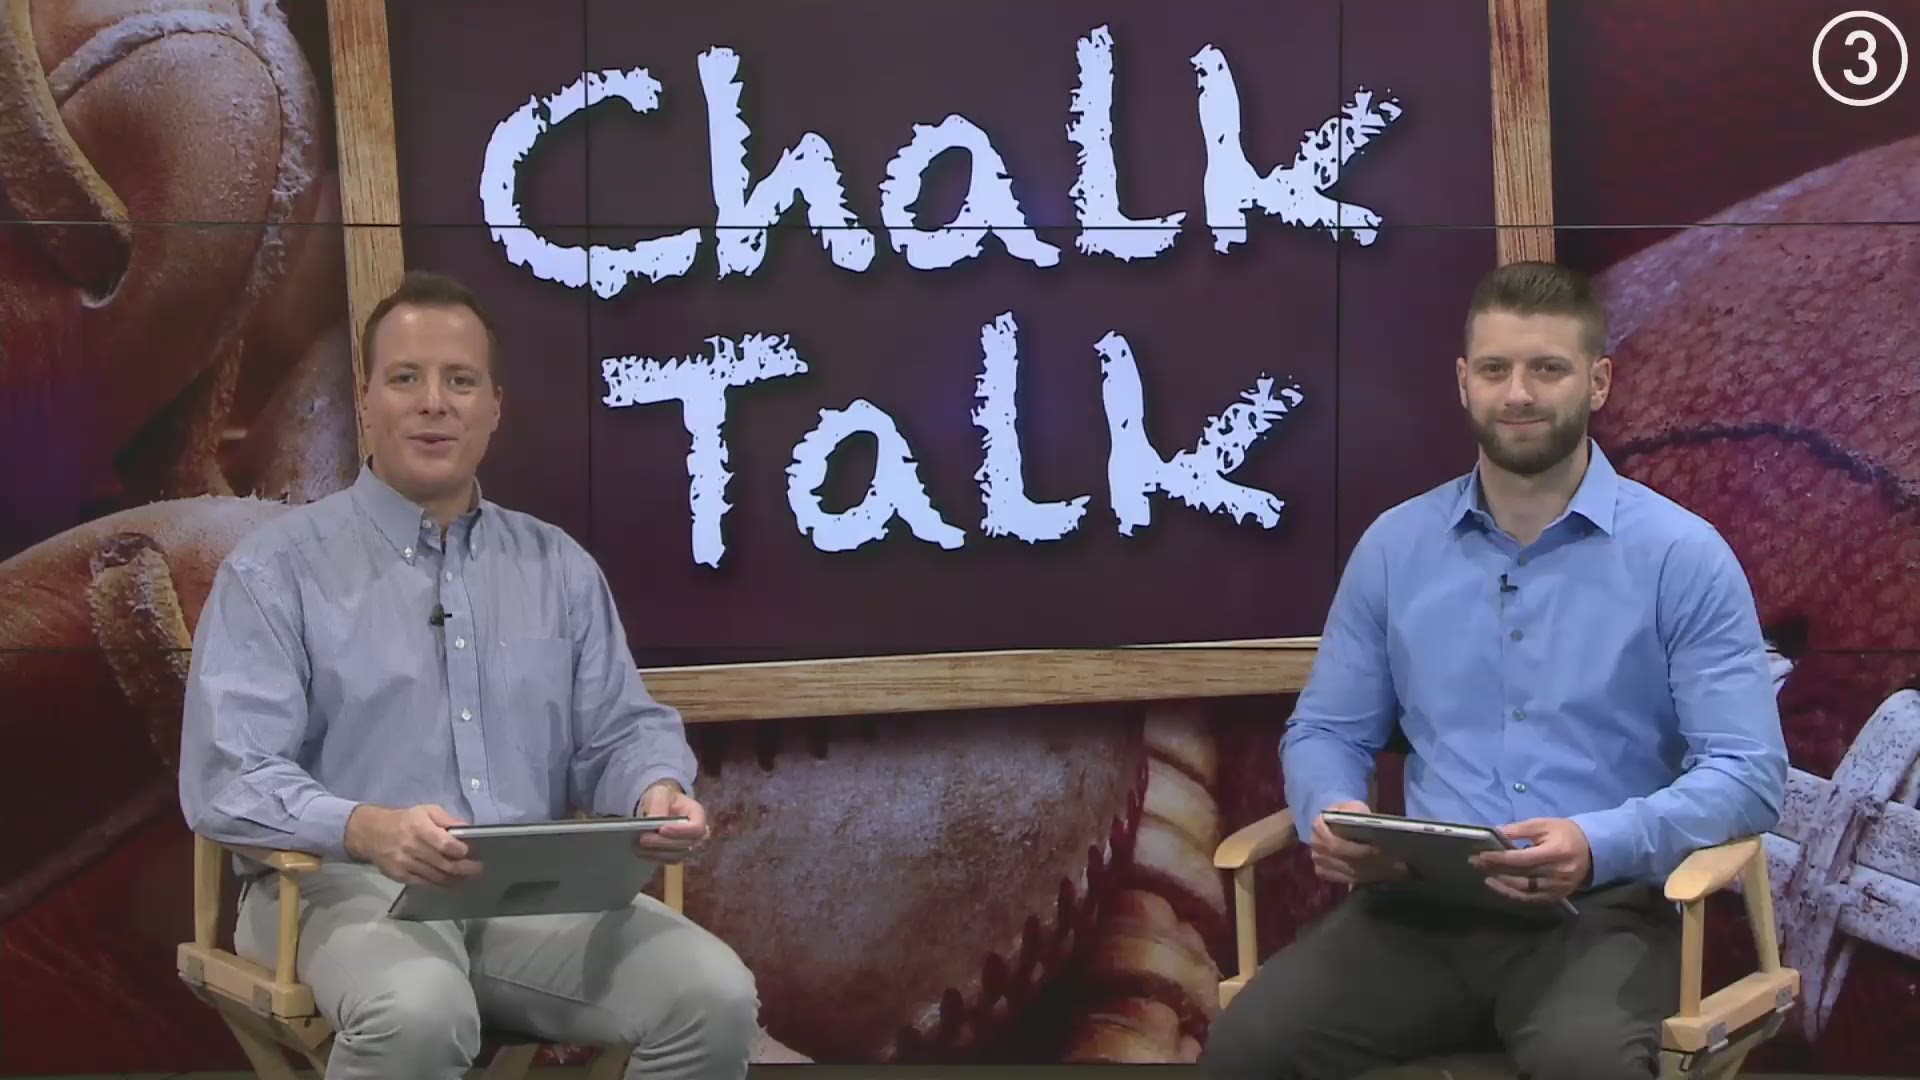 On the 7th episode of WKYC's Chalk Talk, Nick Camino and Ben Axelrod discuss and make their picks of Week 8 of the college football season and Week 7 of the NFL.